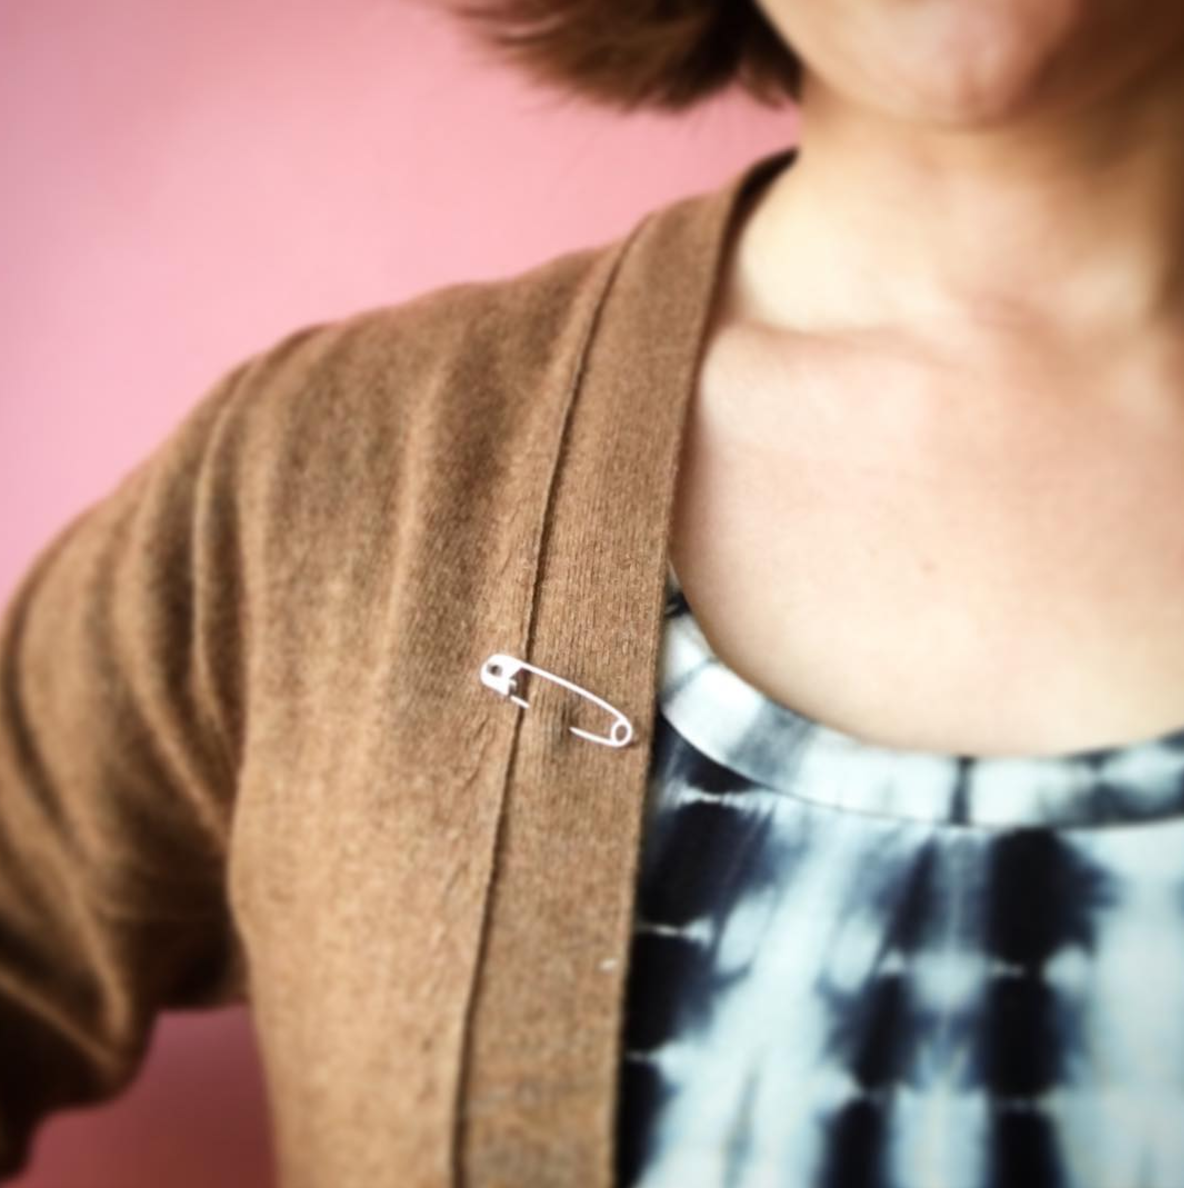 Here's the powerful reason people are wearing safety pins on their